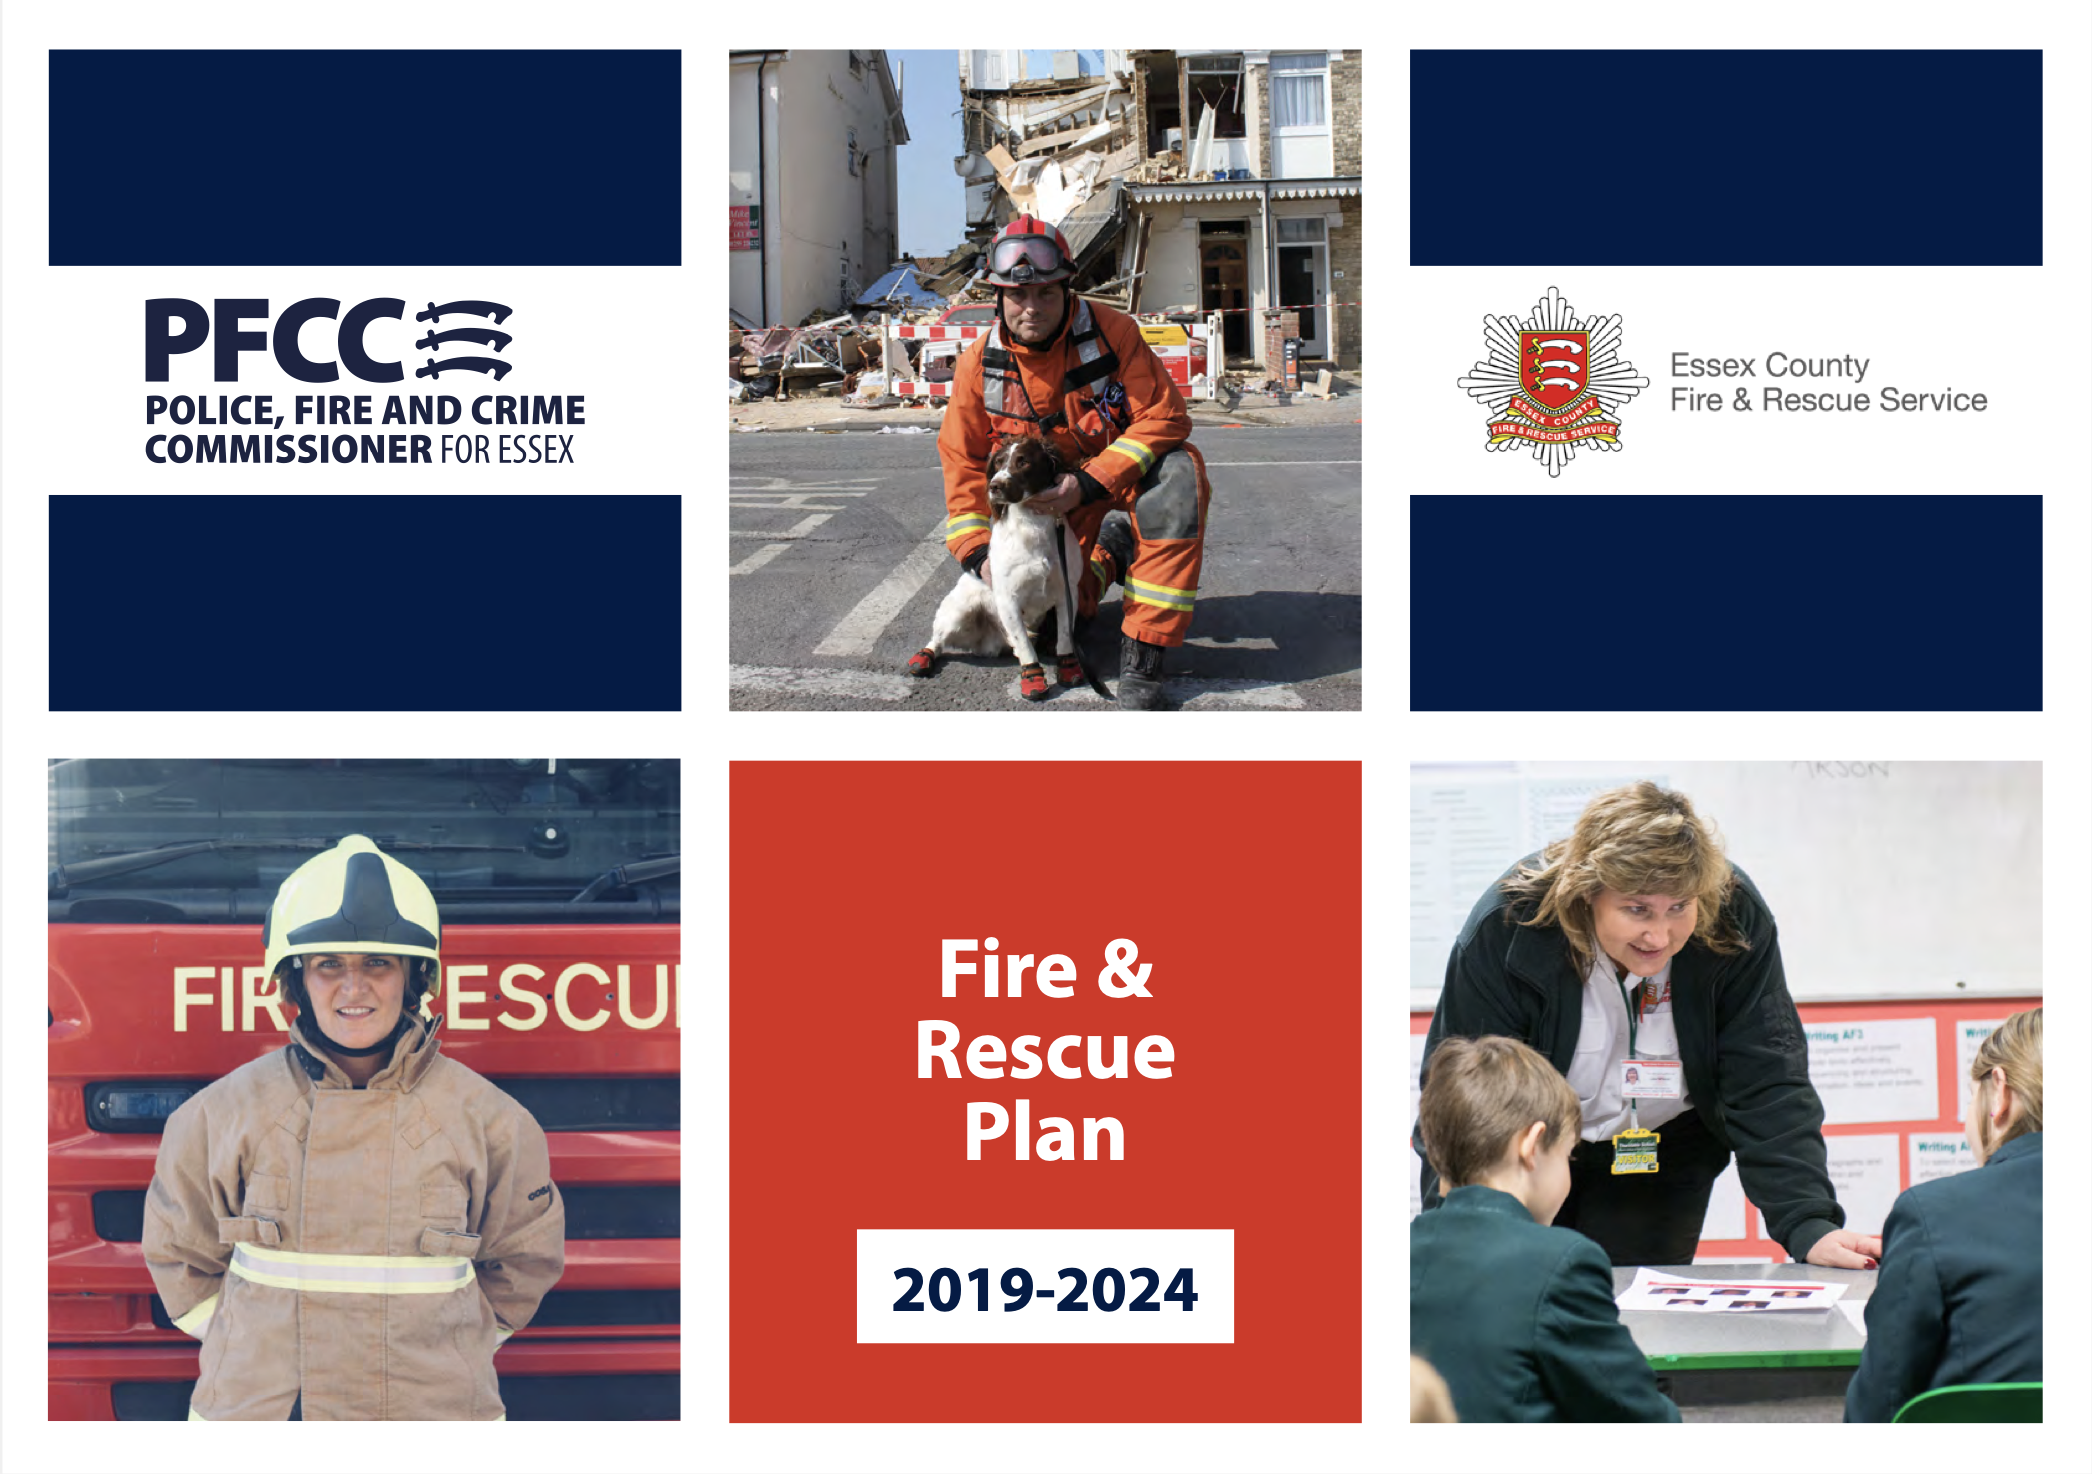 Our Fire and Rescue Plan